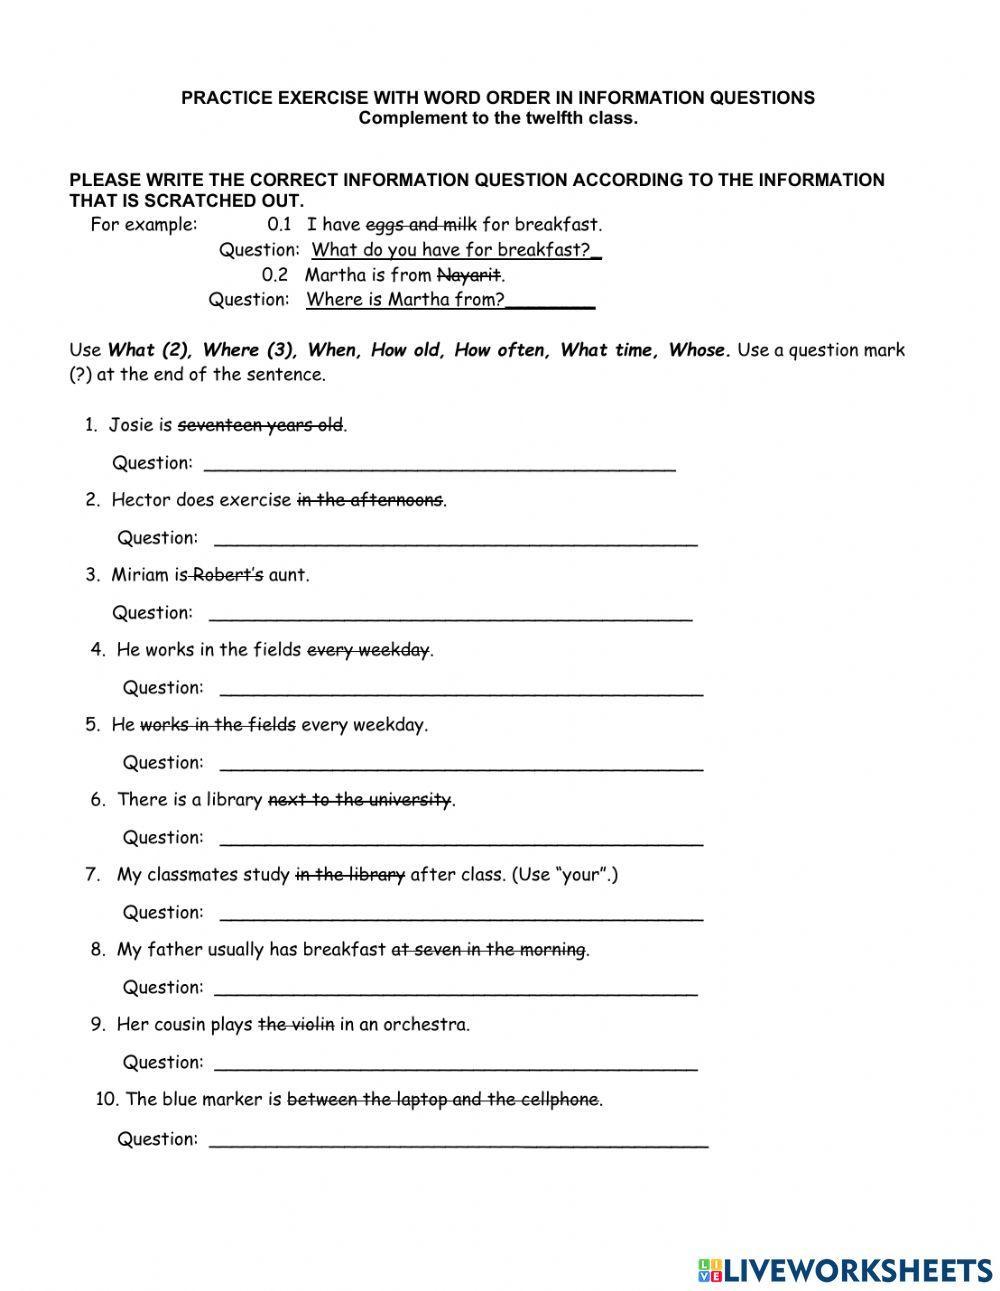 Practice exercise with Word Order in Information Questions worksheet